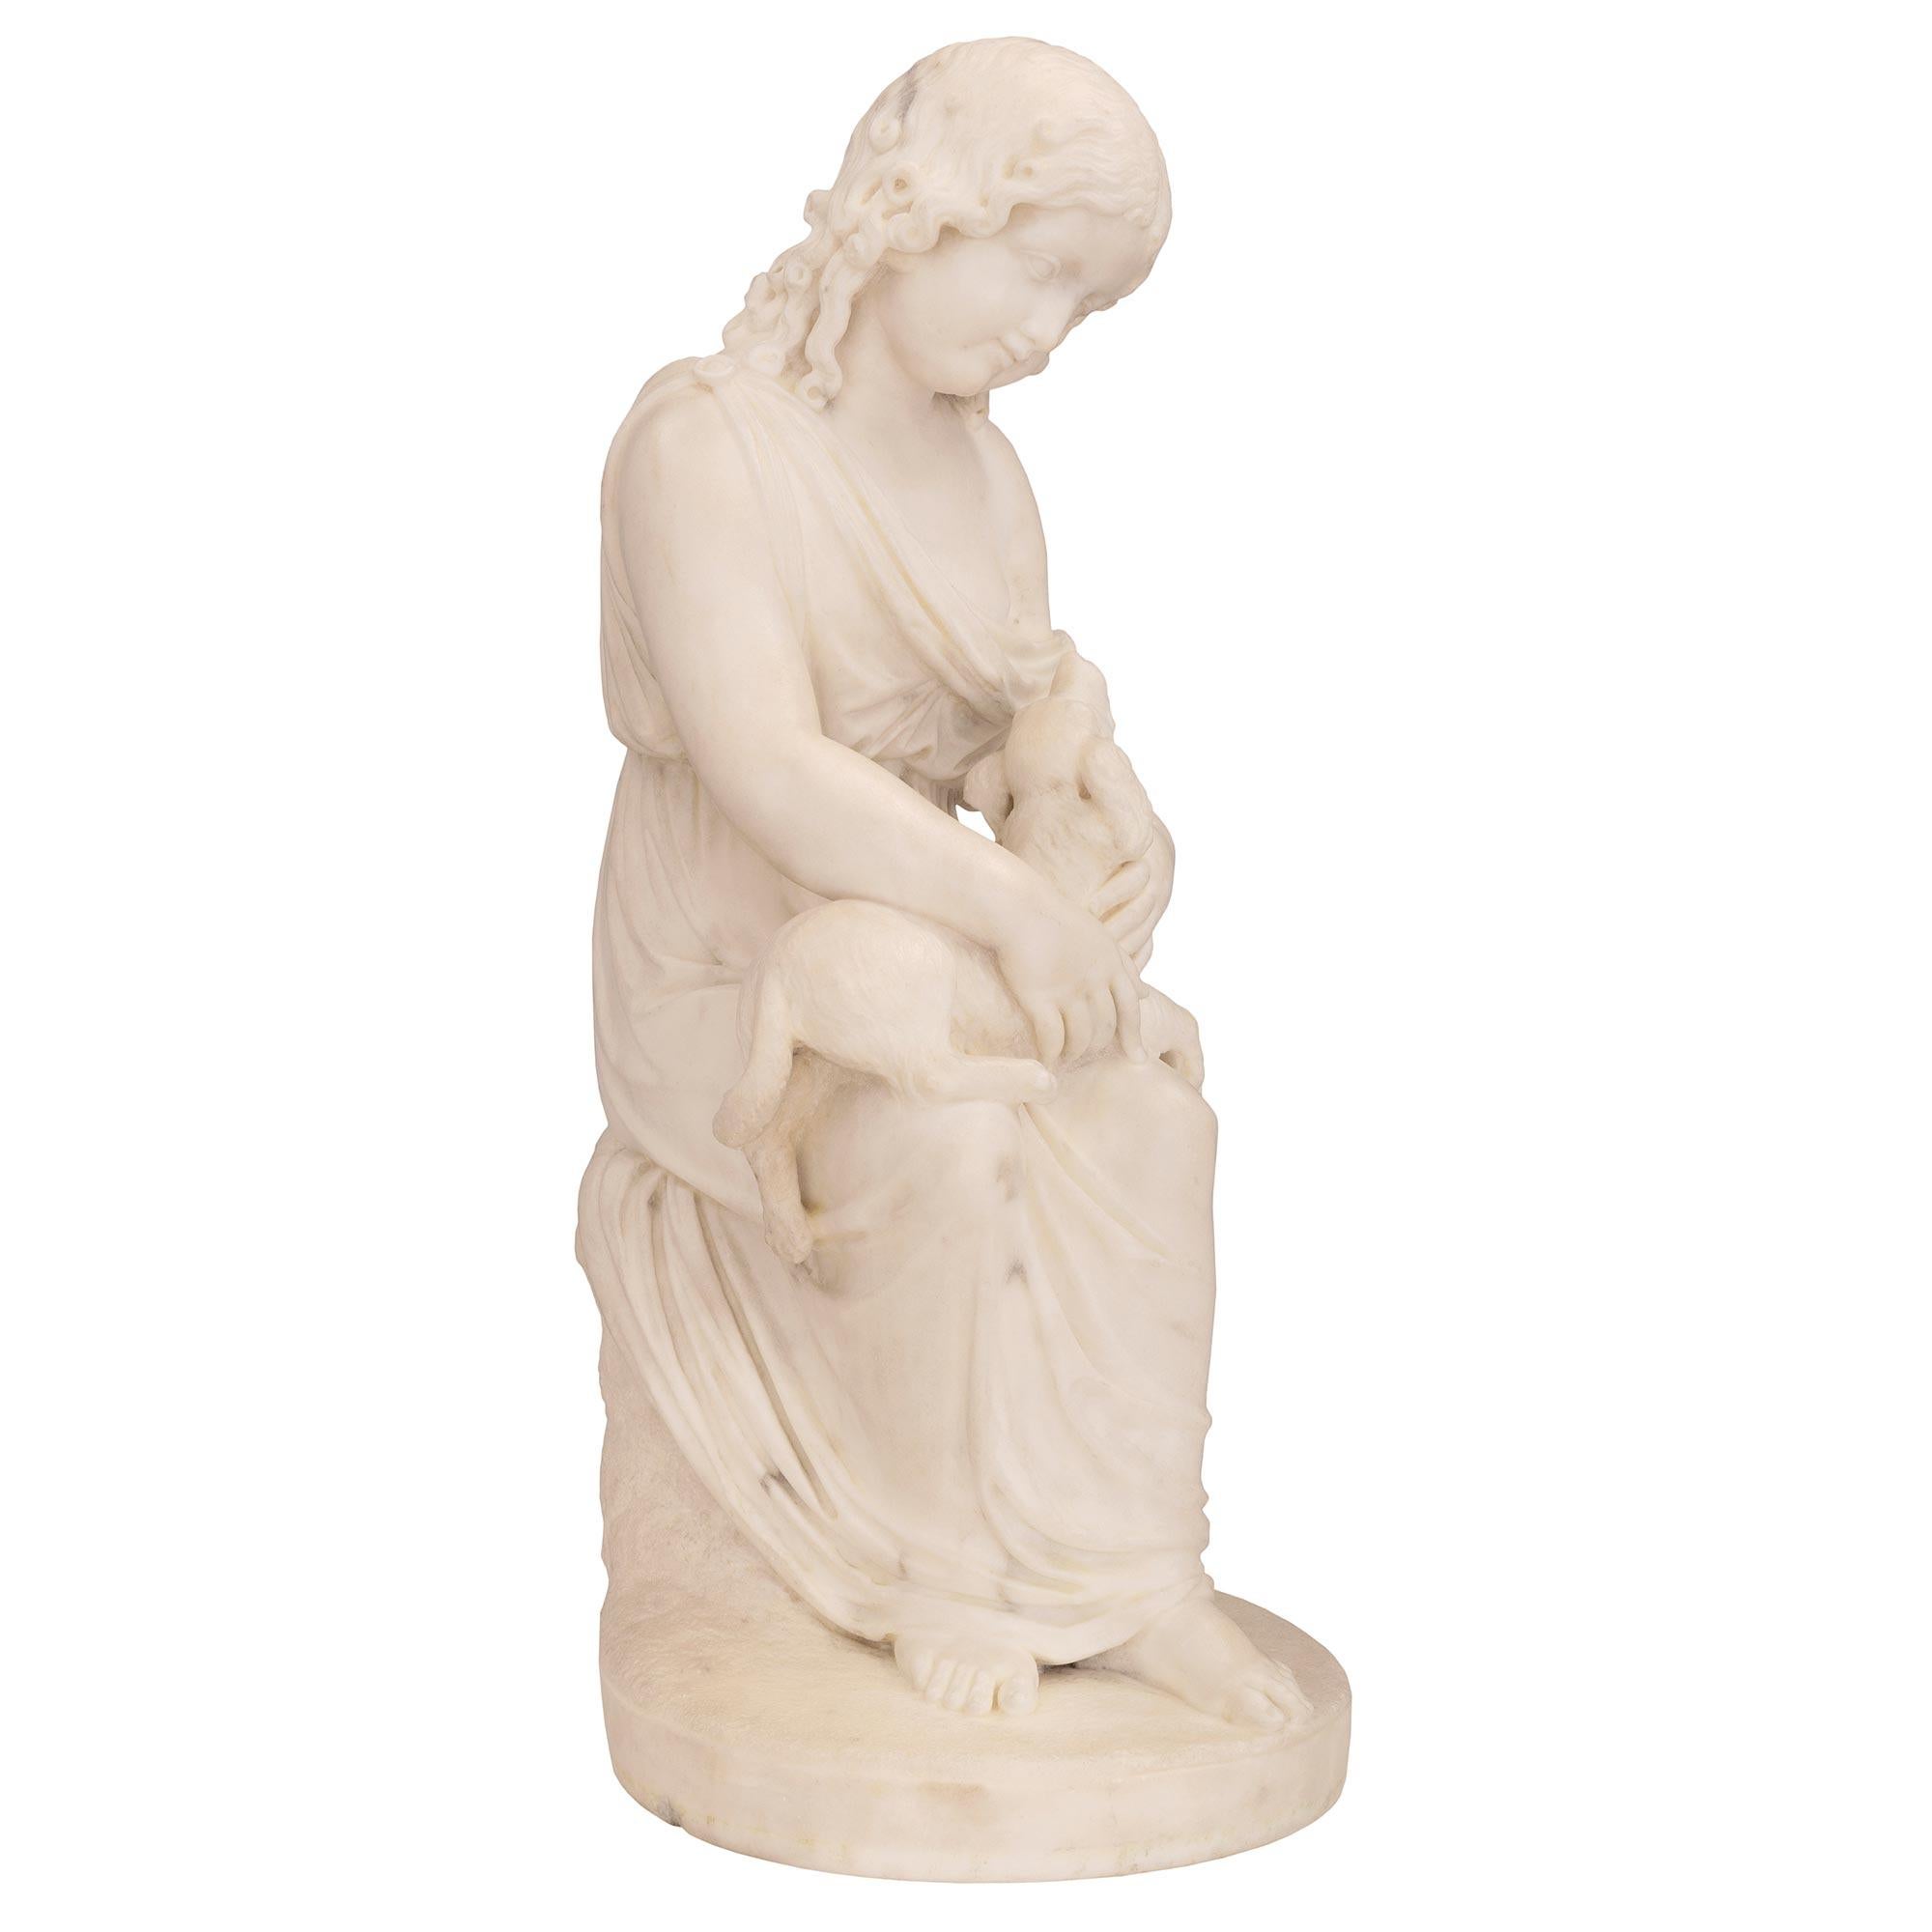 A wonderfully executed Italian 19th century white Carrara marble statue of a young girl with her dog. The statue is raised by a circular base with a fine ground-like design and a large rock at the back. The beautiful young girl is seated on the rock